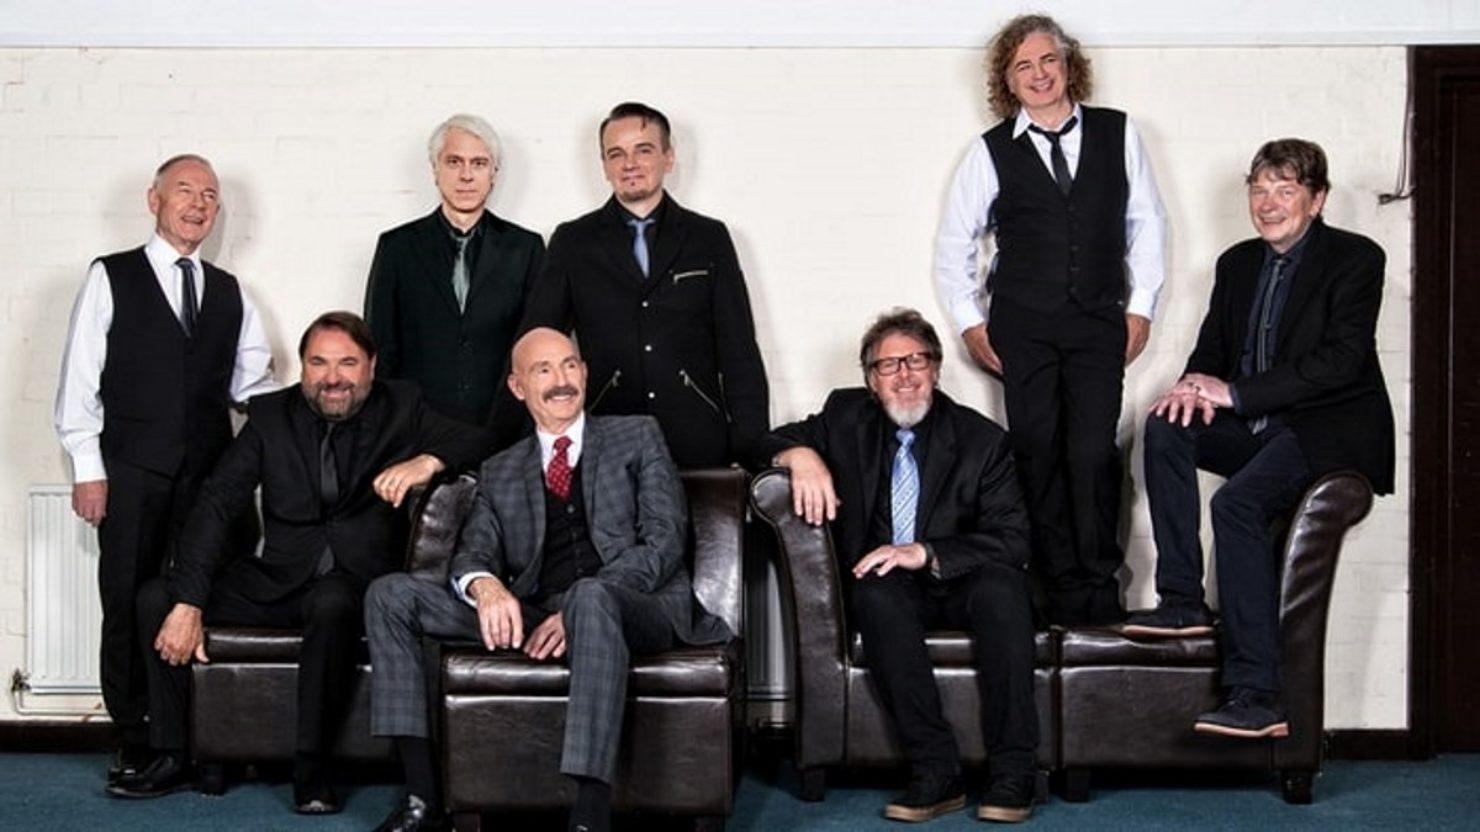 Concert Review: With Attention To Detail, King Crimson Embraces Its Long History